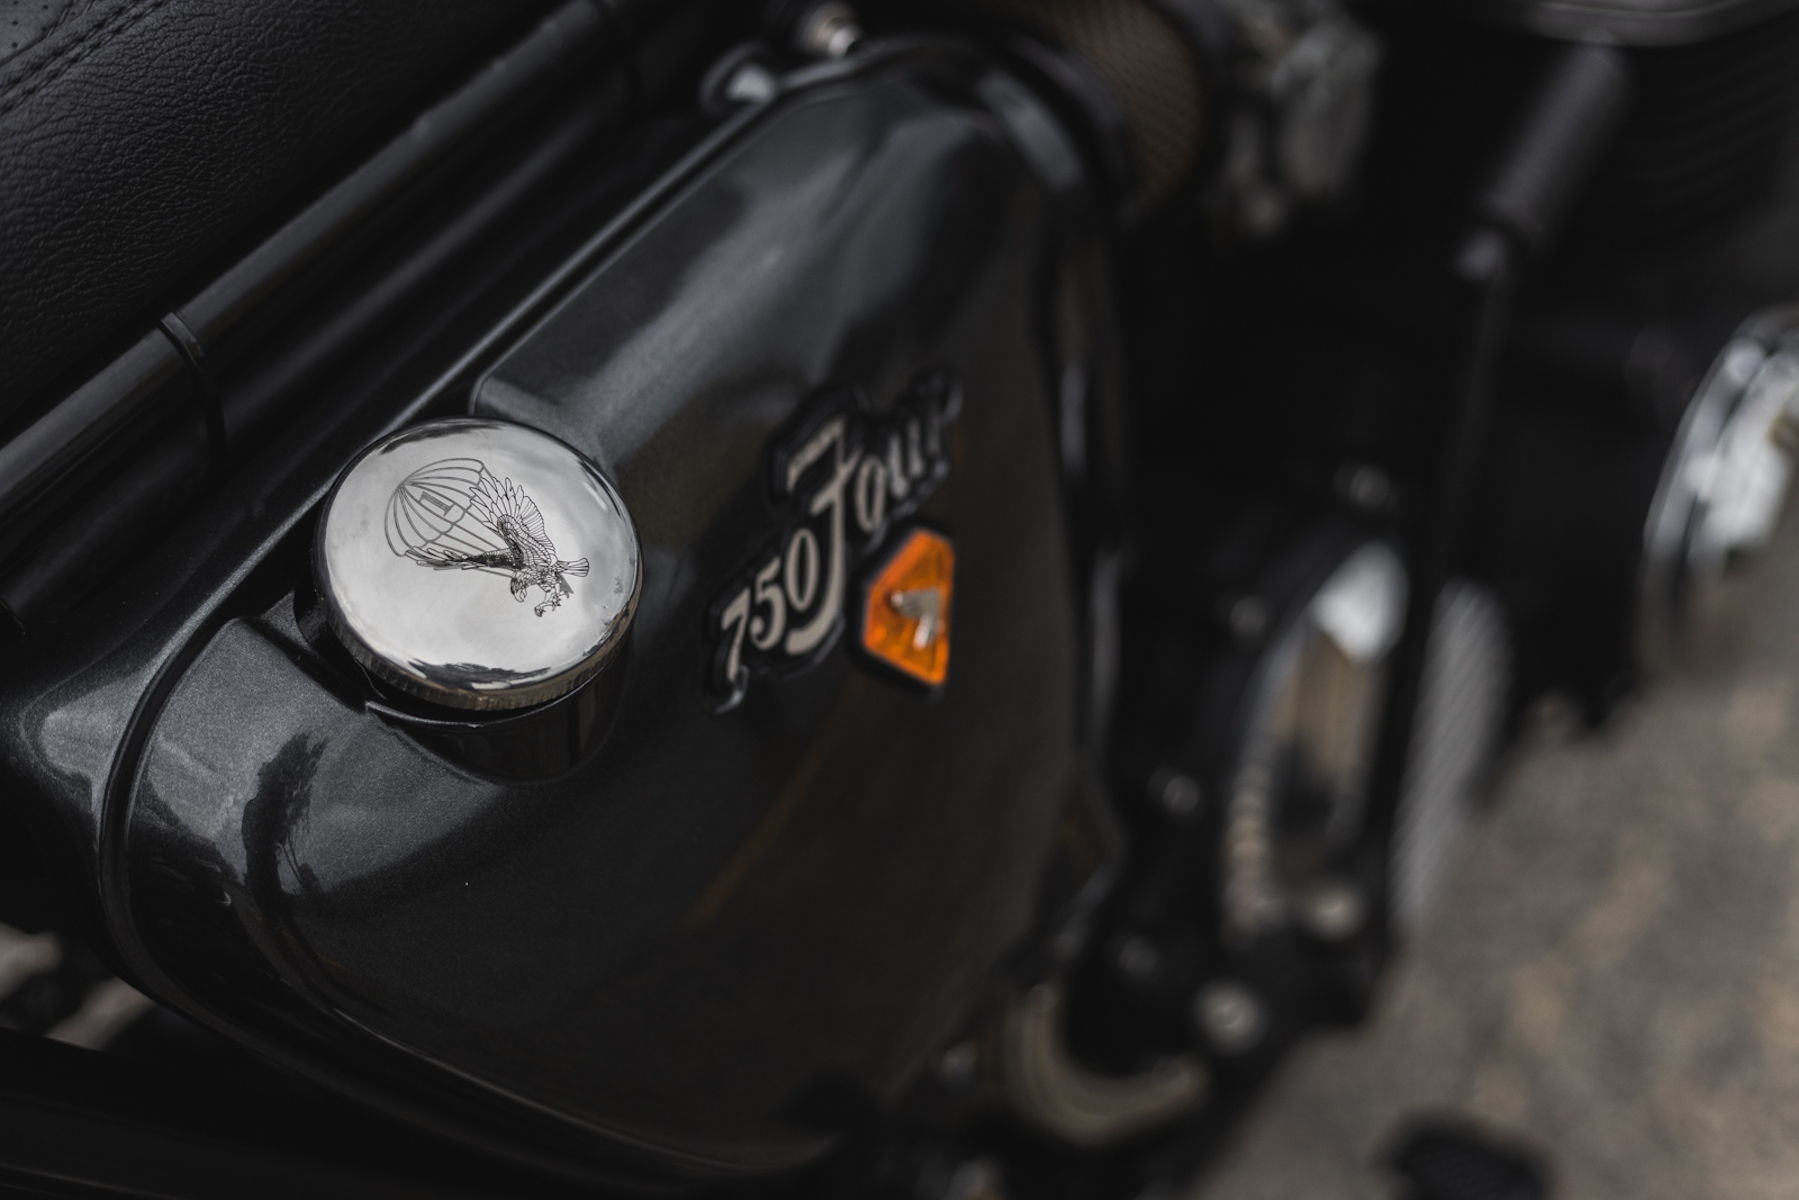 A close-up of a Honda CB750 with focus on the engraved oil tank cap